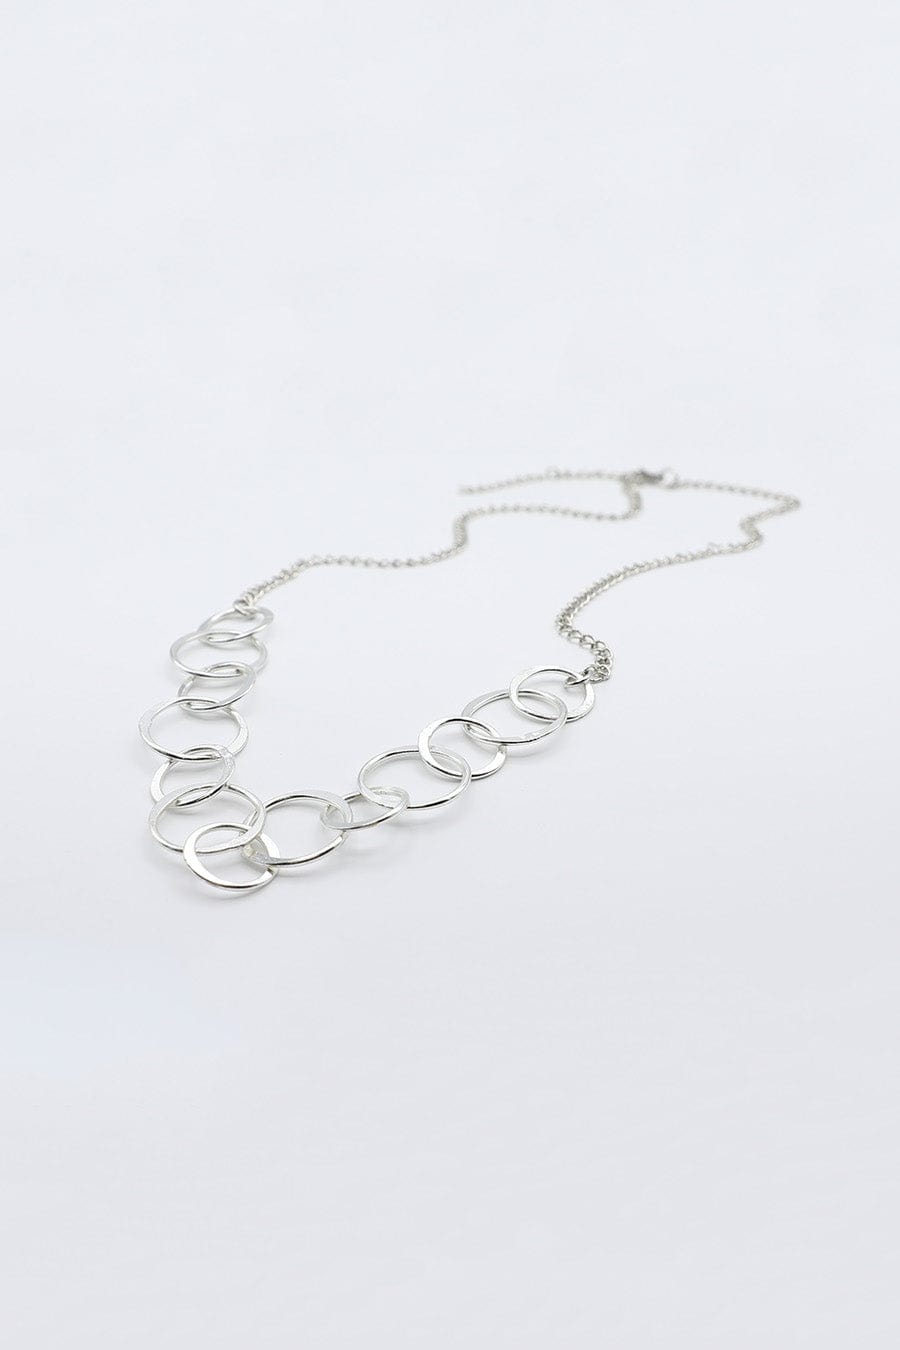 Cascade Of Silver Rings Necklace